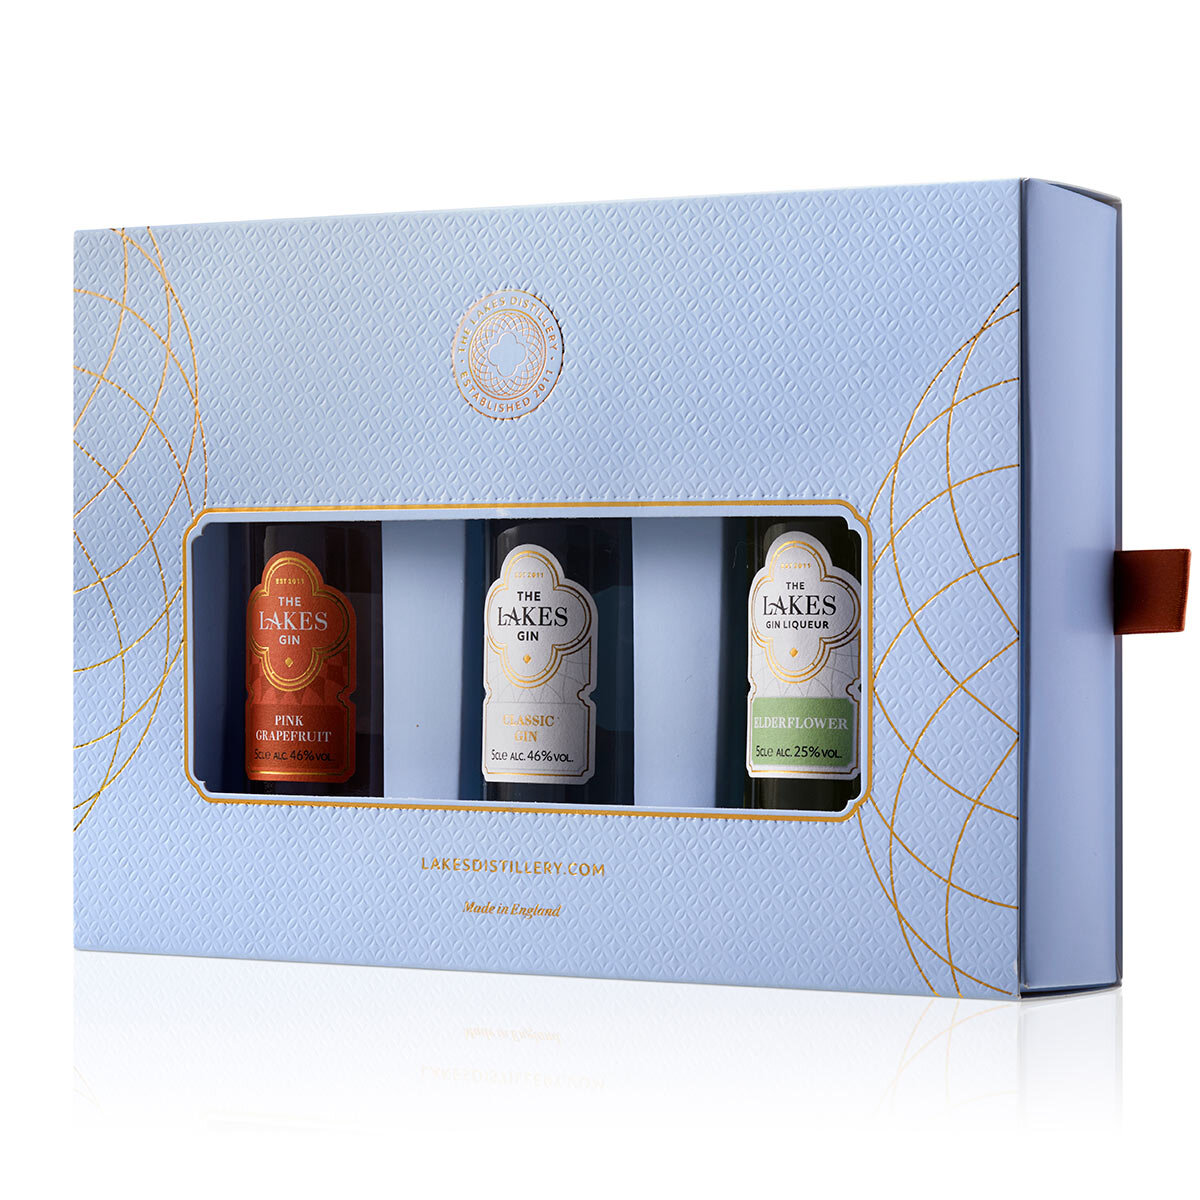 Side on view of gift pack of 3 gins in blue cardboard box